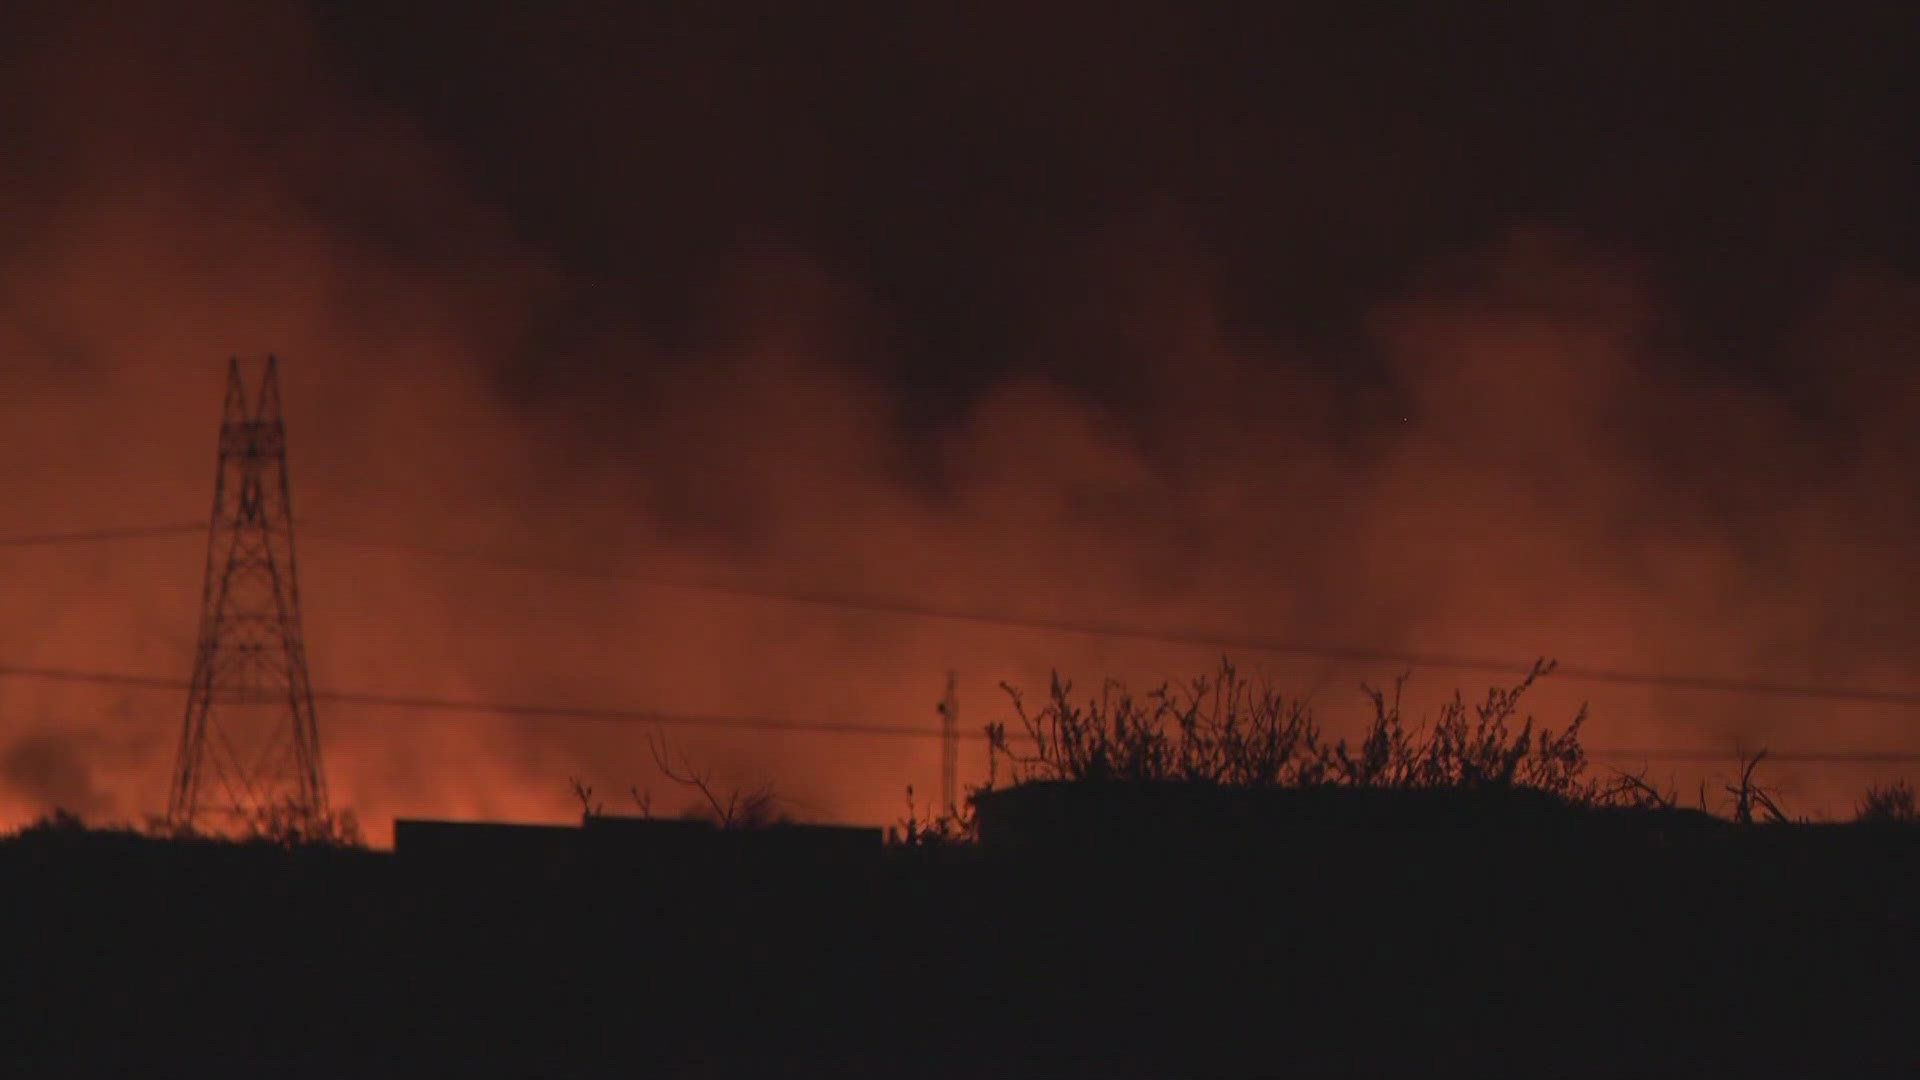 The Boulder View Fire has burned 3,736 acres in north Scottsdale and has forced people in the area to evacuate from their homes. 12News has the latest on the fire.